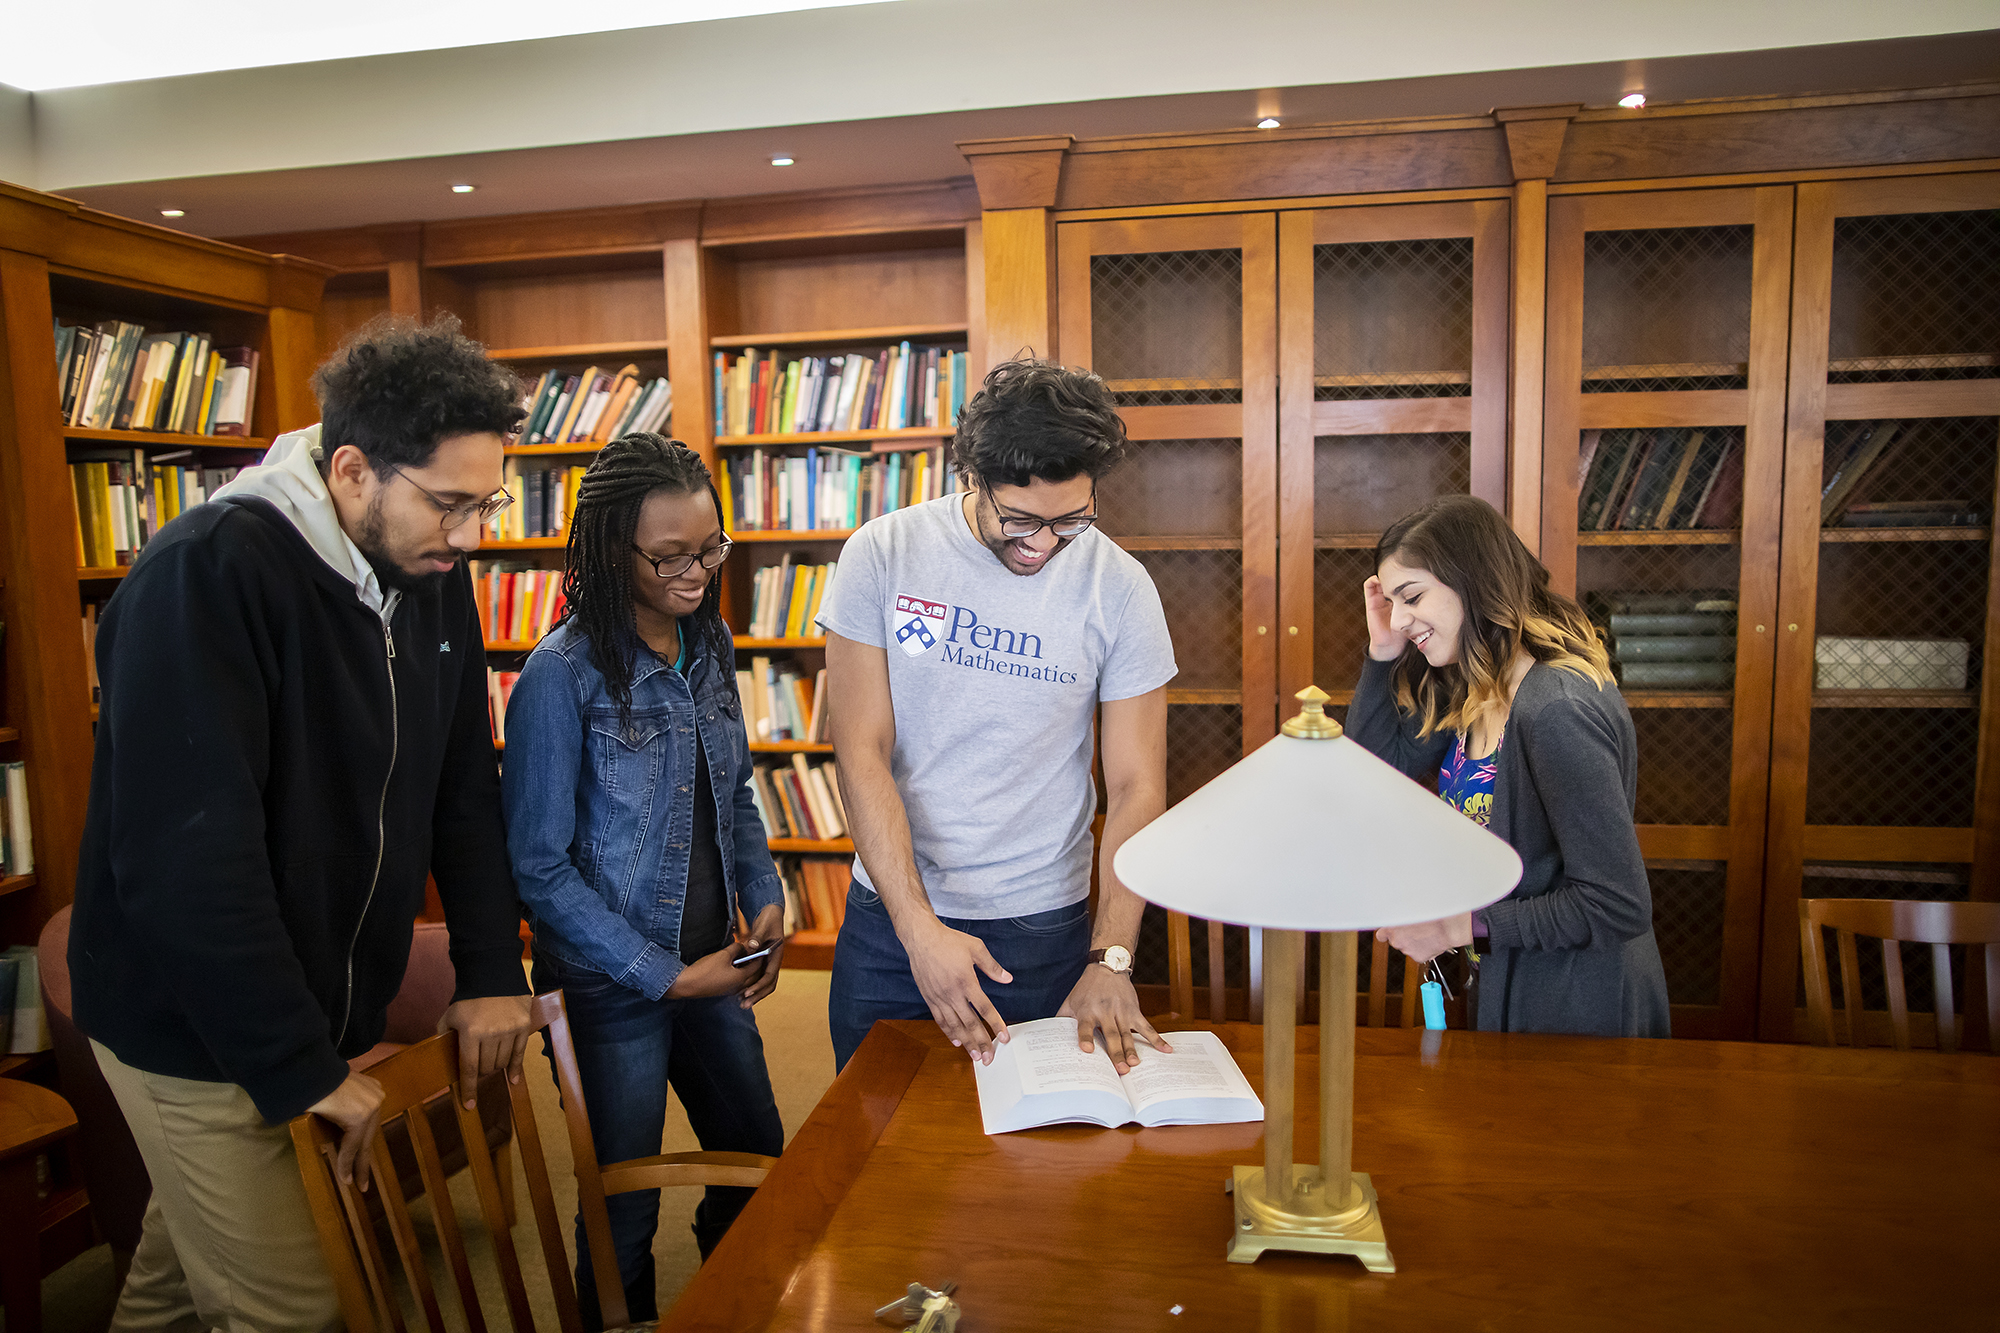 four students standing together in a library looking at a book on a table